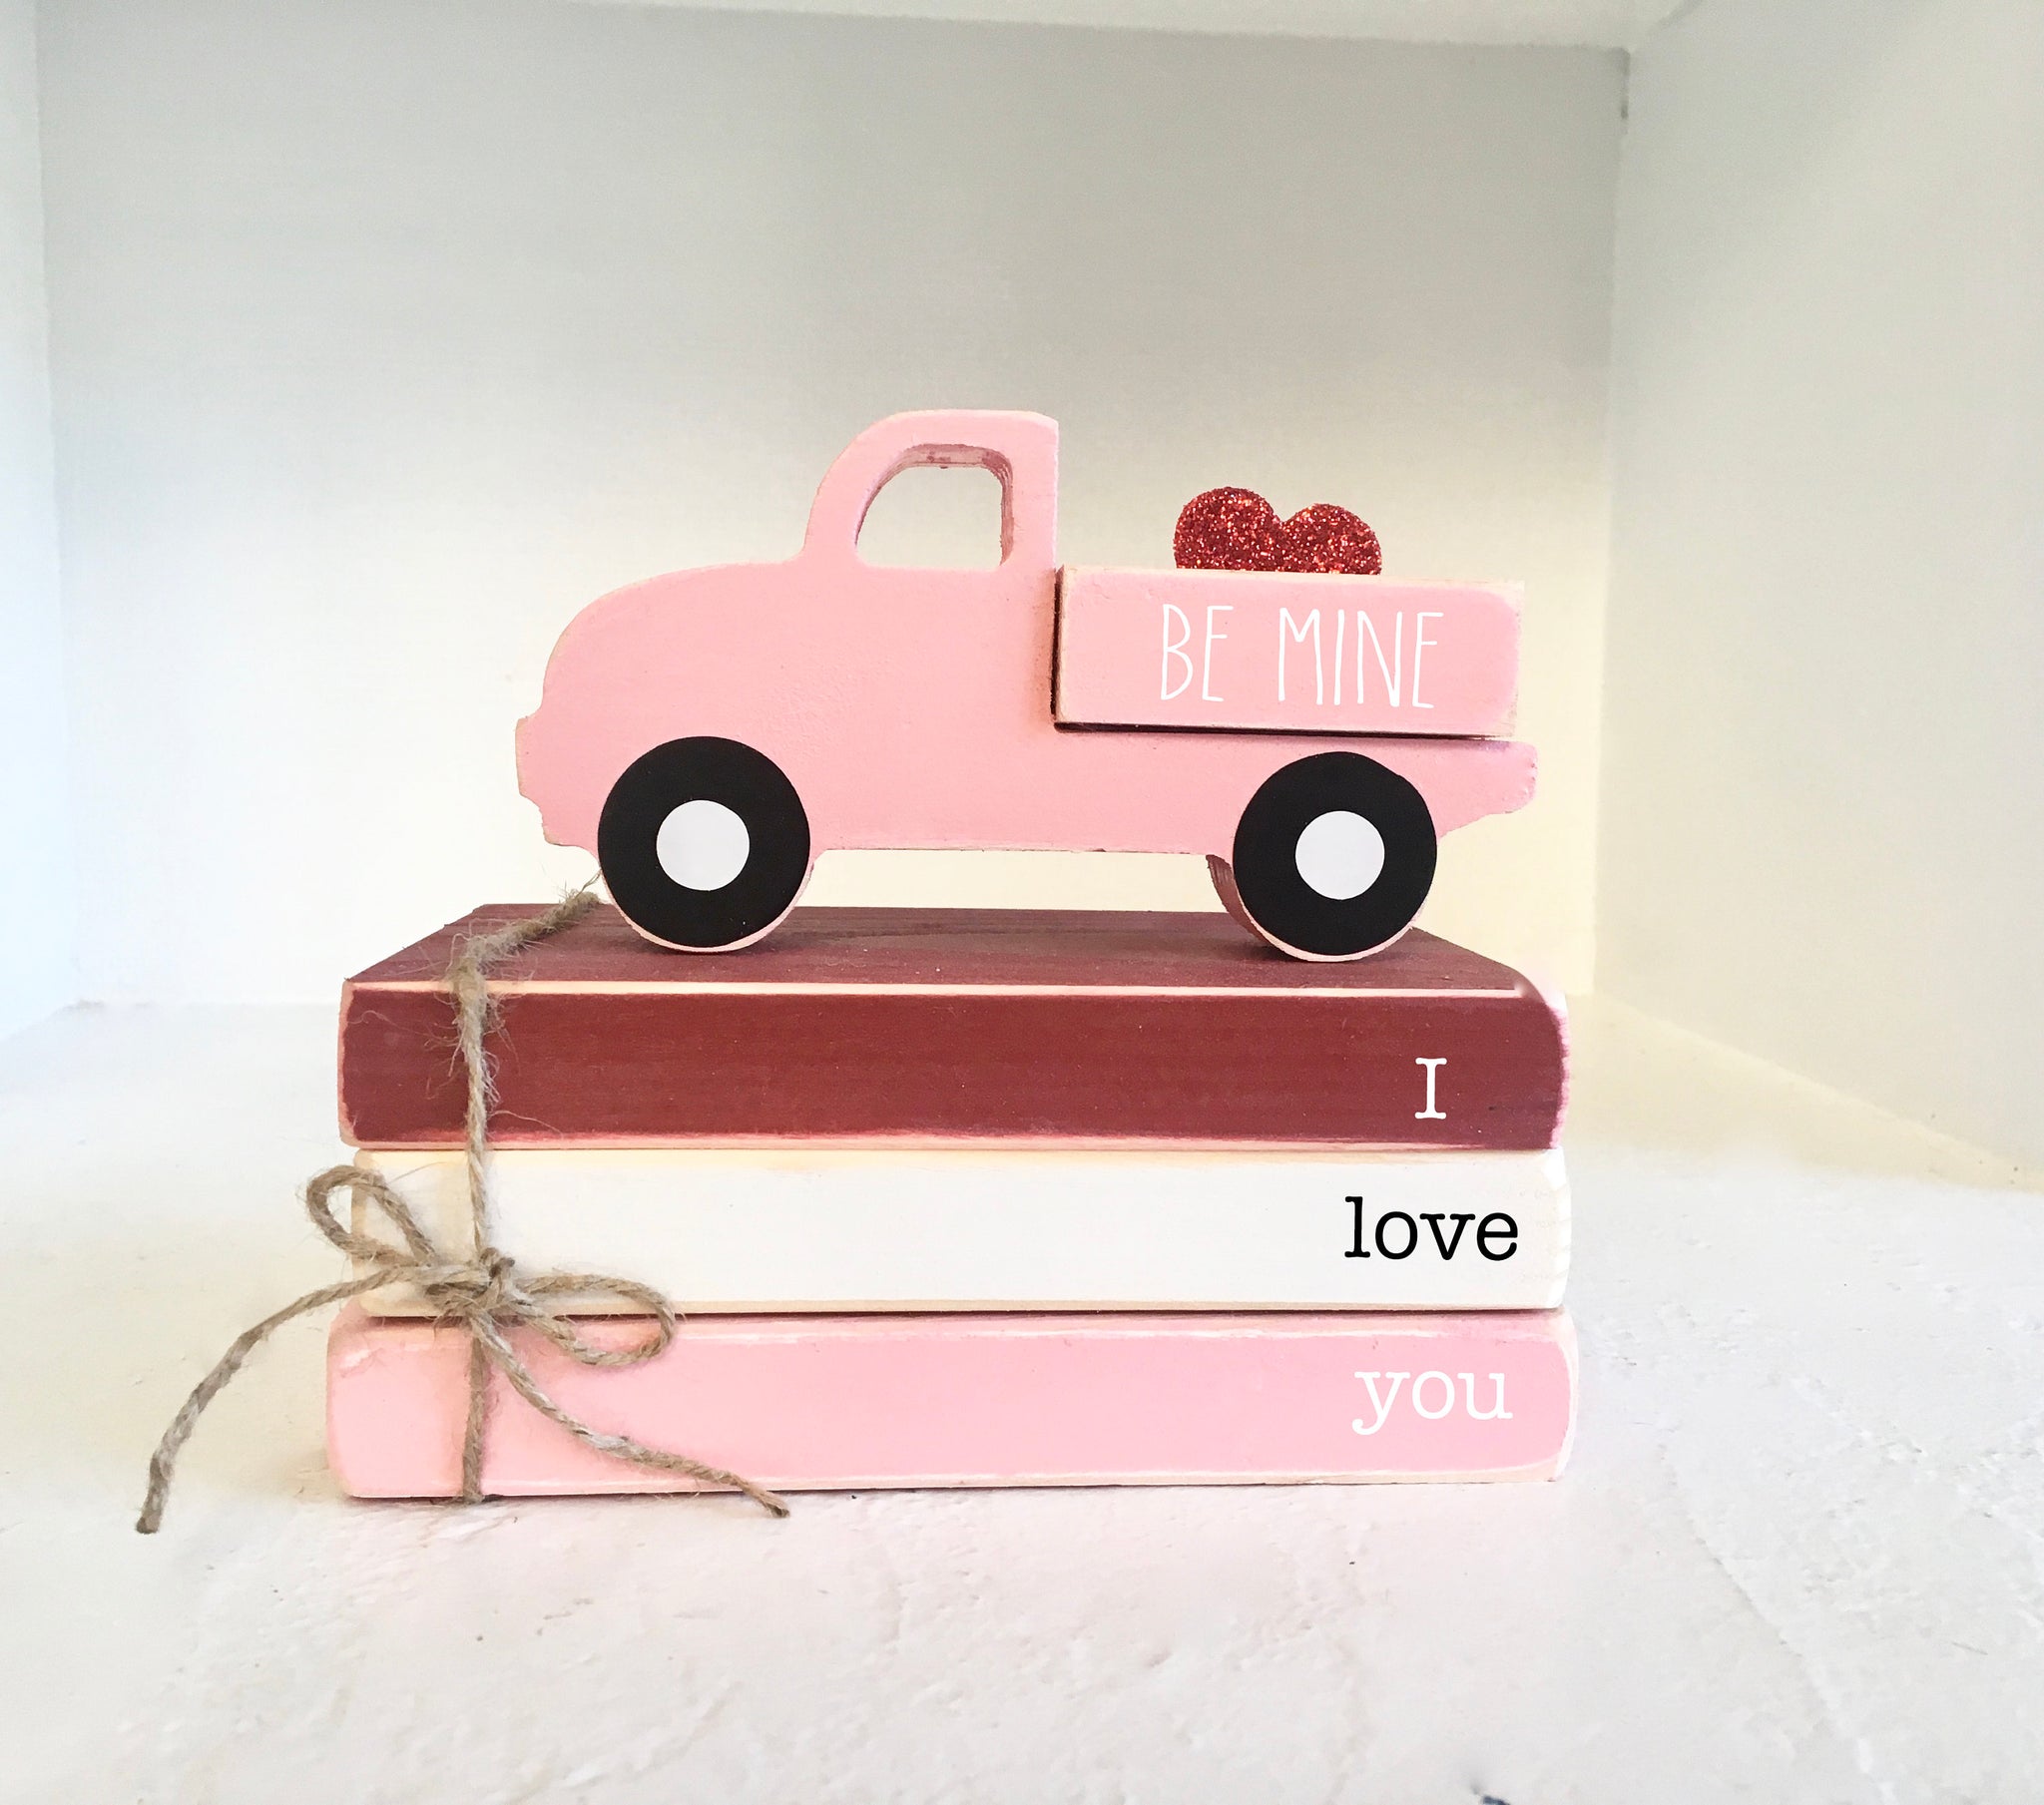 Valentines day, Tiered tray decor, mini books, Wooden truck, Mini book bundle, Book stack, pink truck,  Faux books,  Valentines gift